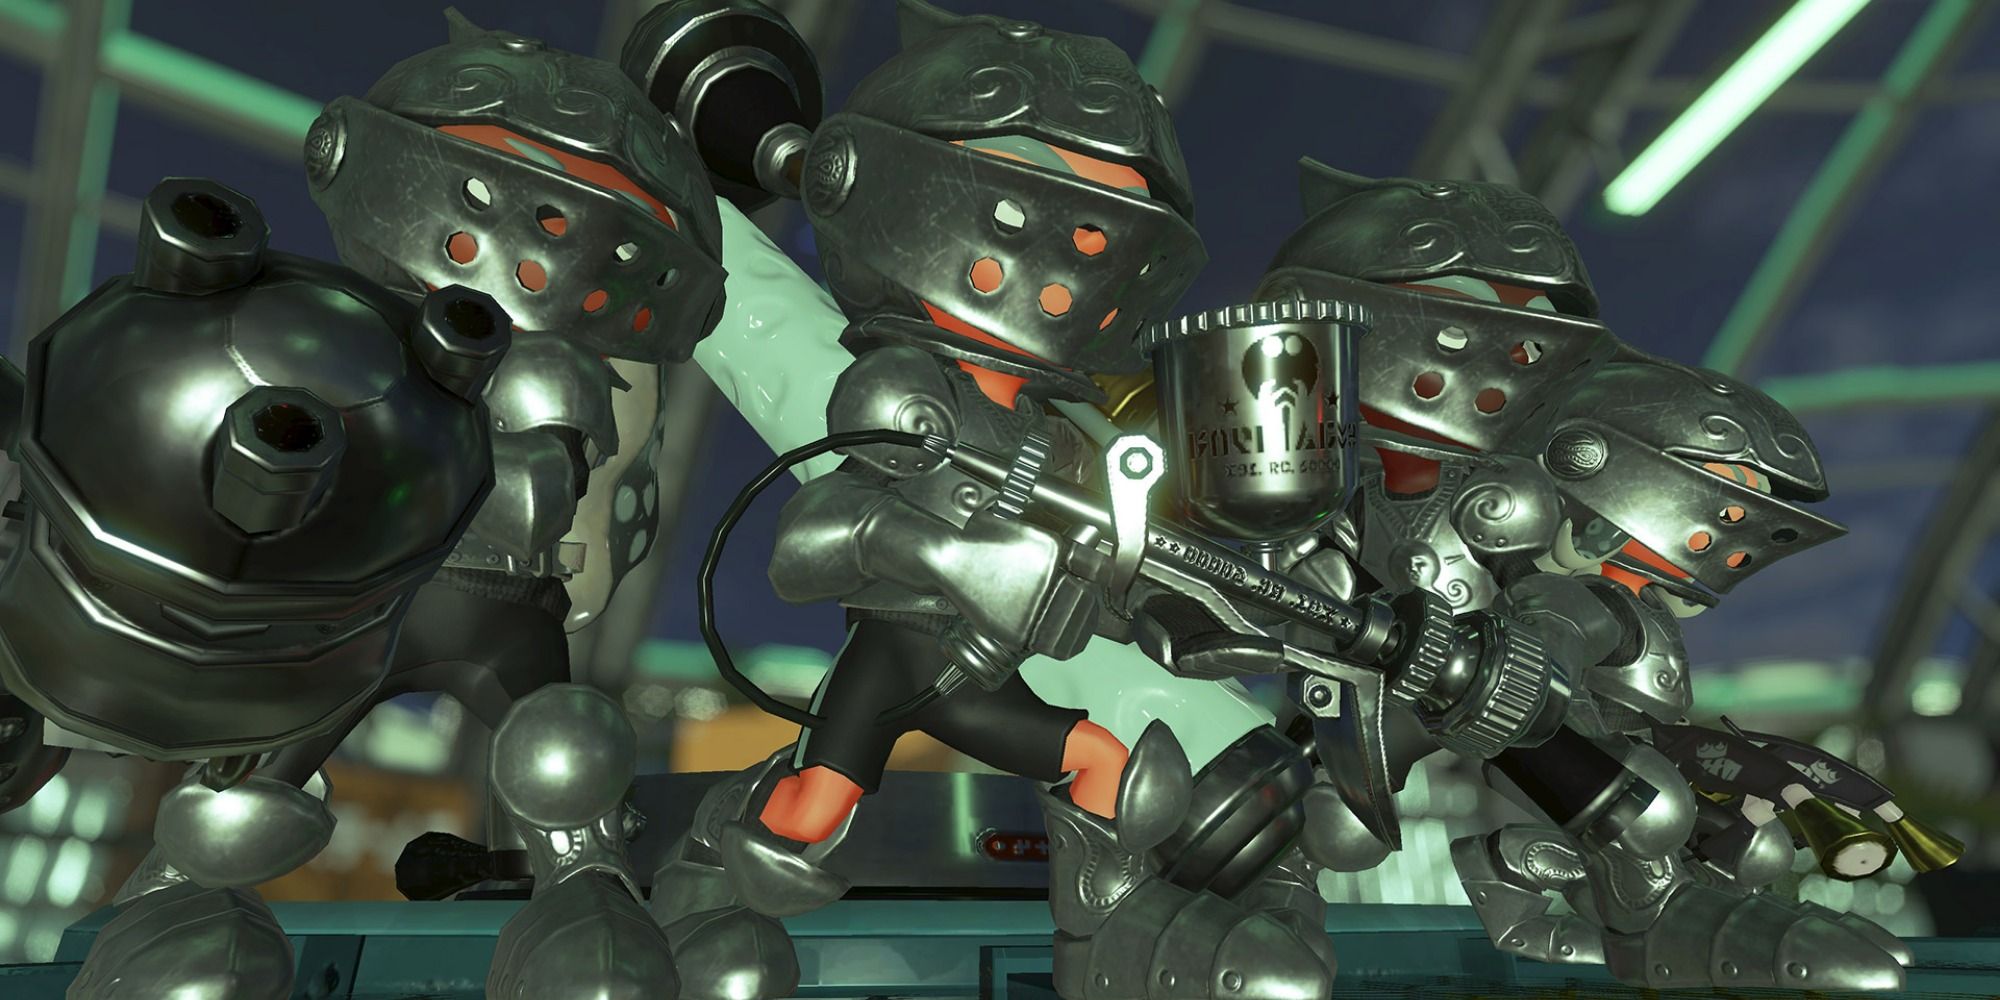 Team of Inklings all wearing Steel Platemail and Helmets, appearing like knights